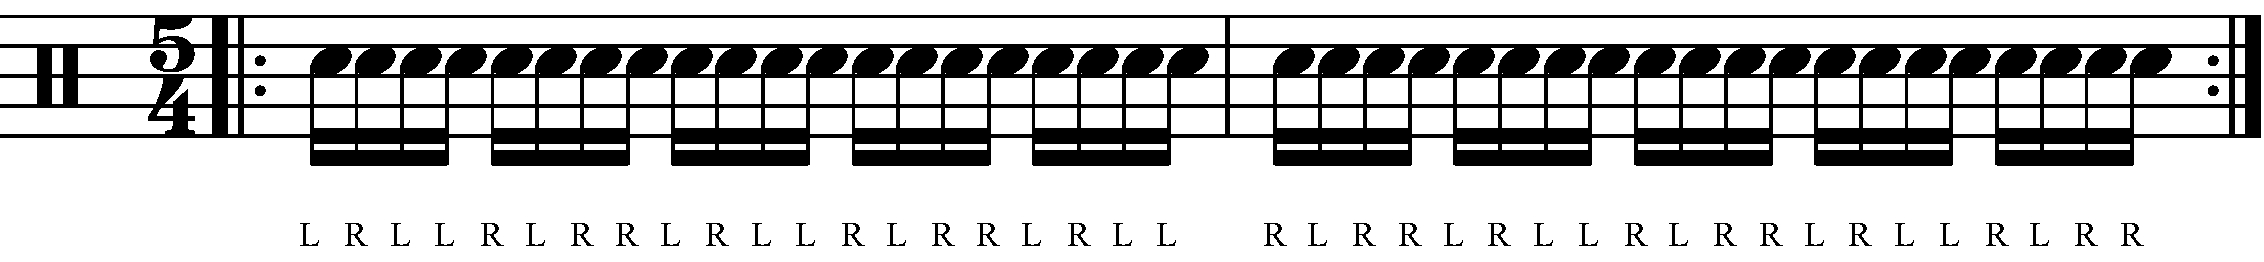 A Paradiddle in 5/4 with reverse sticking